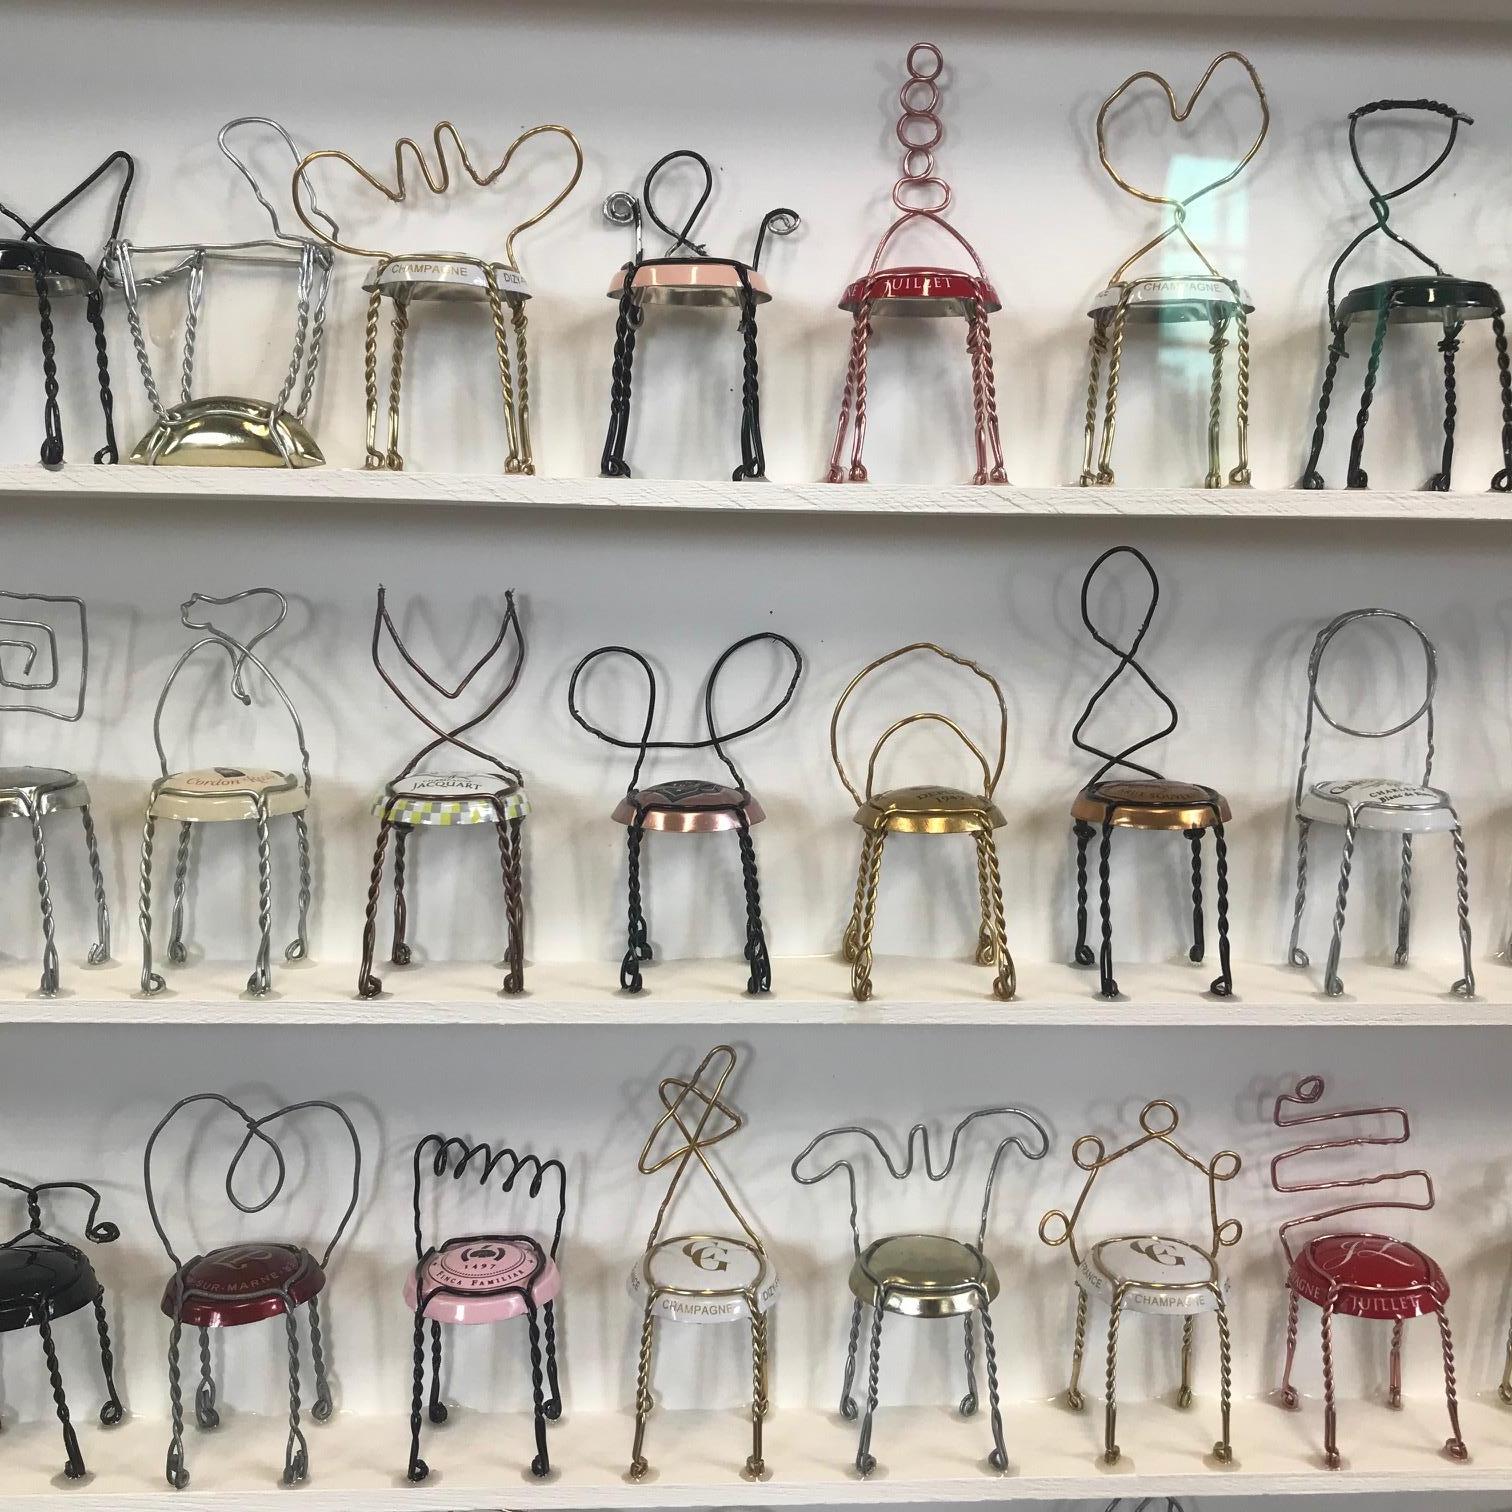 Champagne Chairs by Joanne Tinker, Original and Contemporary Art installation 5